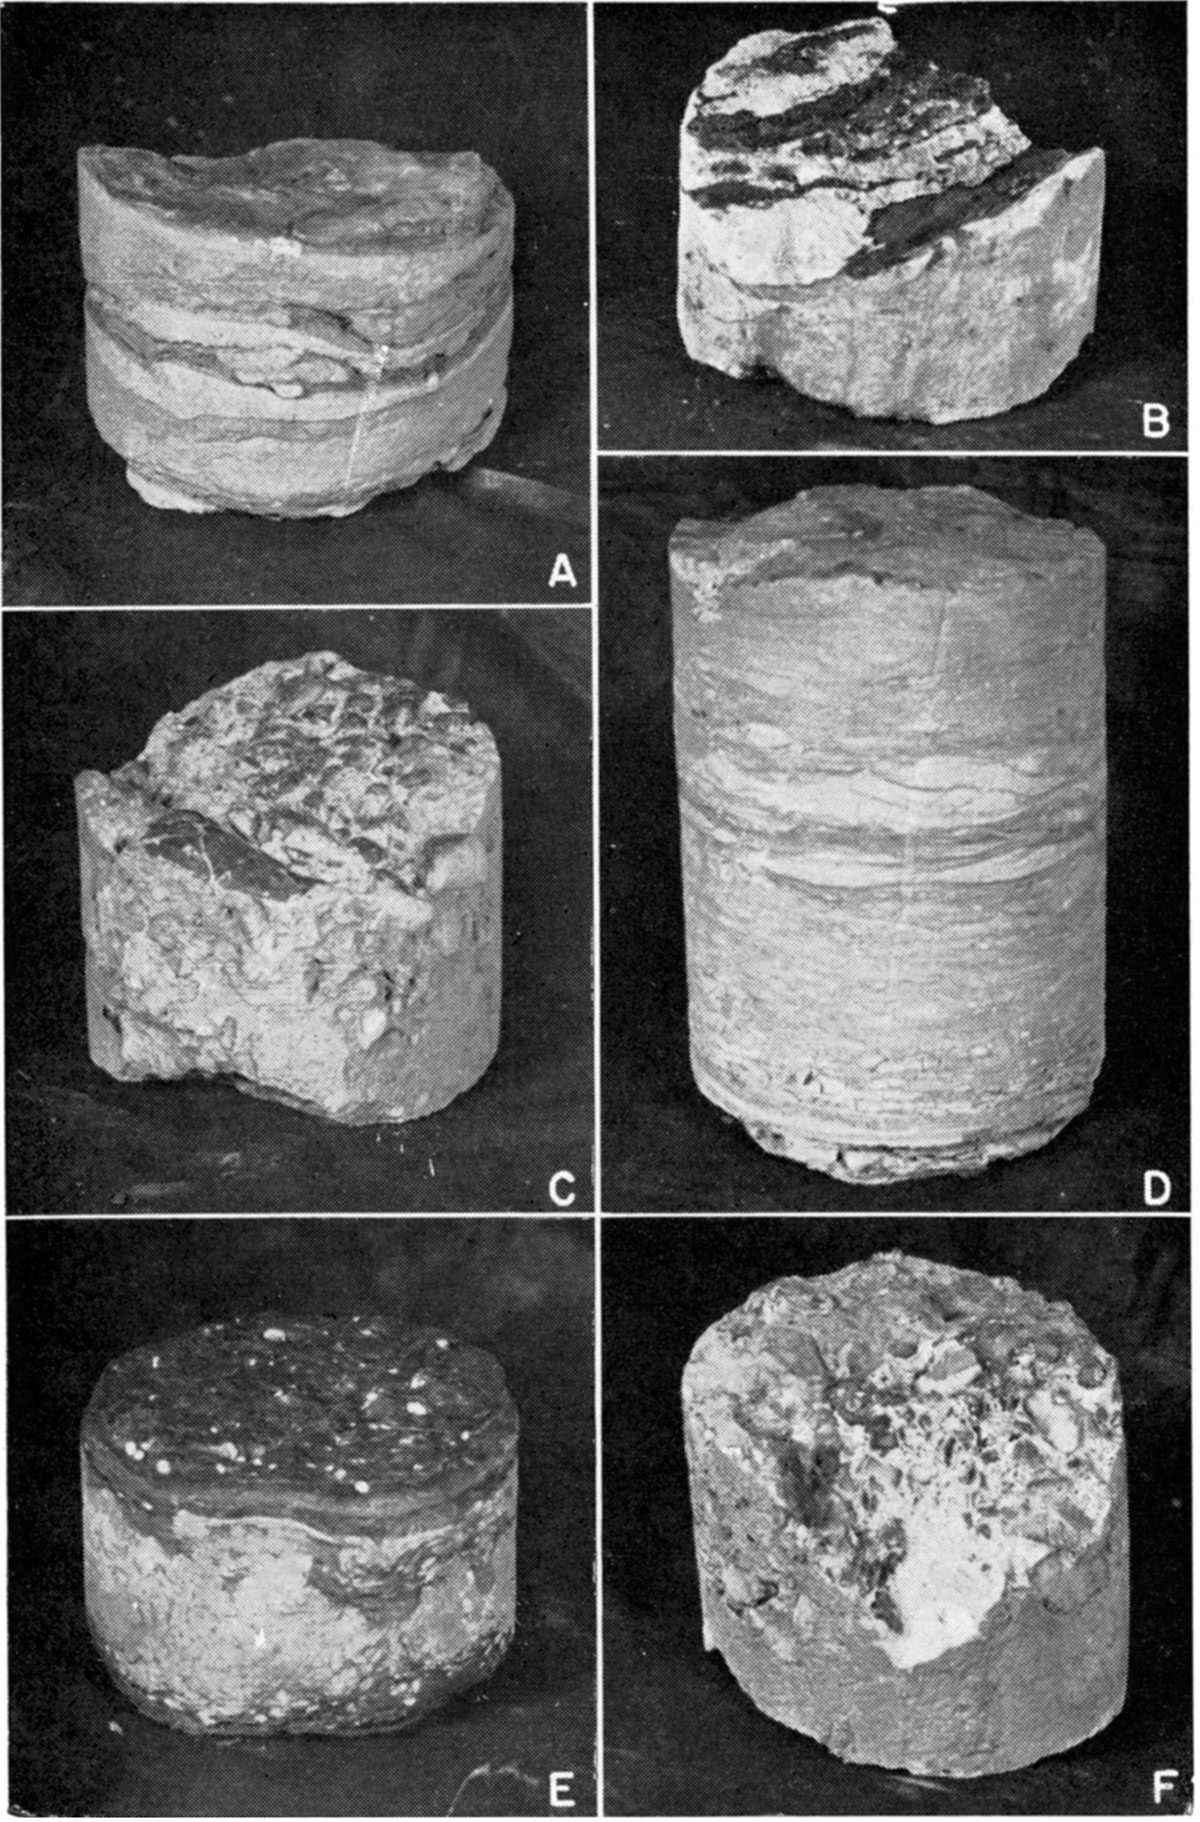 Photographs of representative core samples from Guy F. Atkinson No. 1 Beaumeister well.